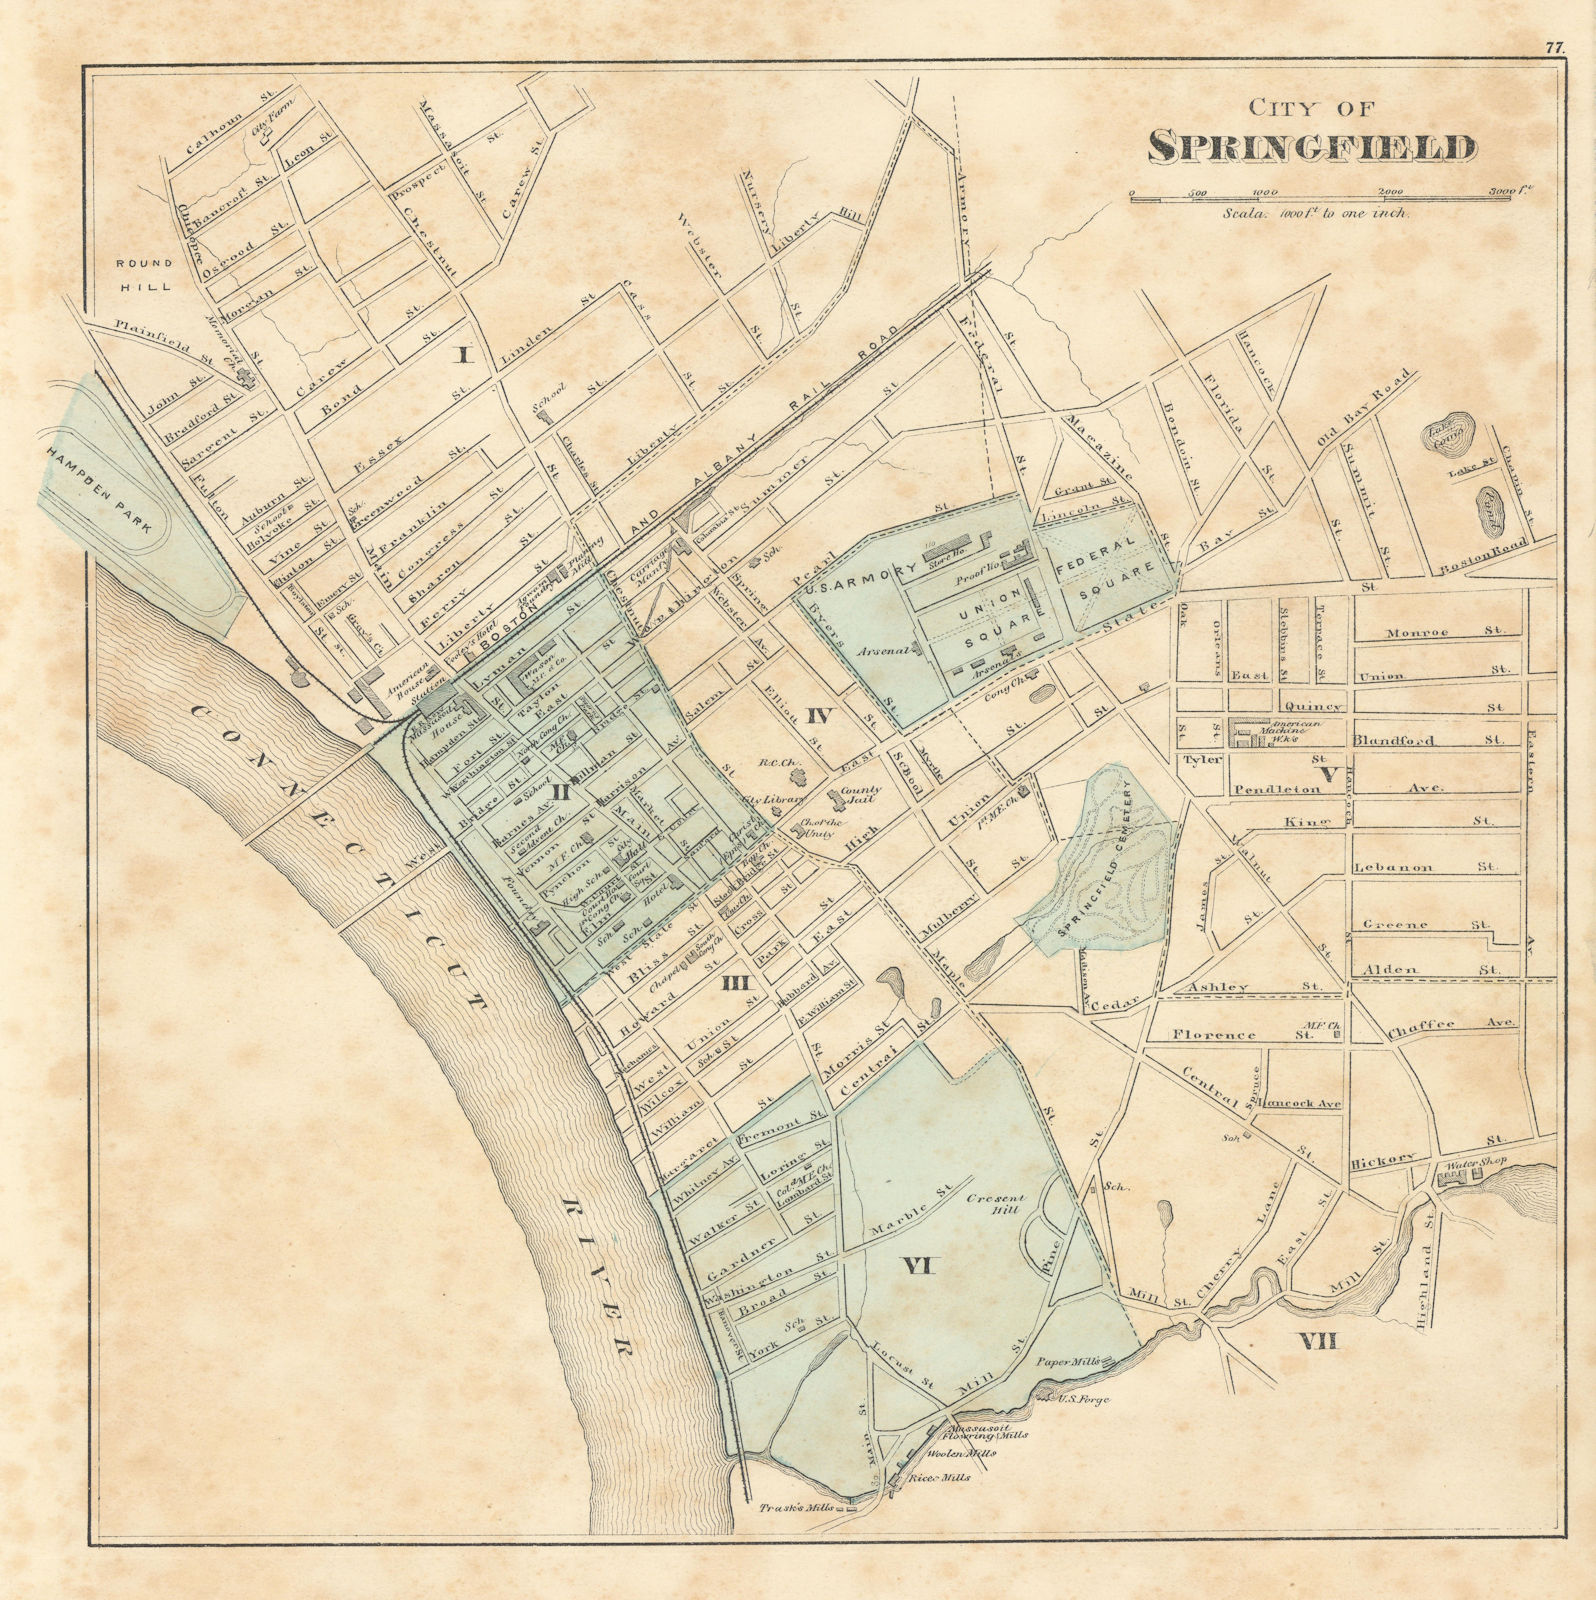 Associate Product City of Springfield, Massachusetts. Town plan. WALLING & GRAY 1871 old map